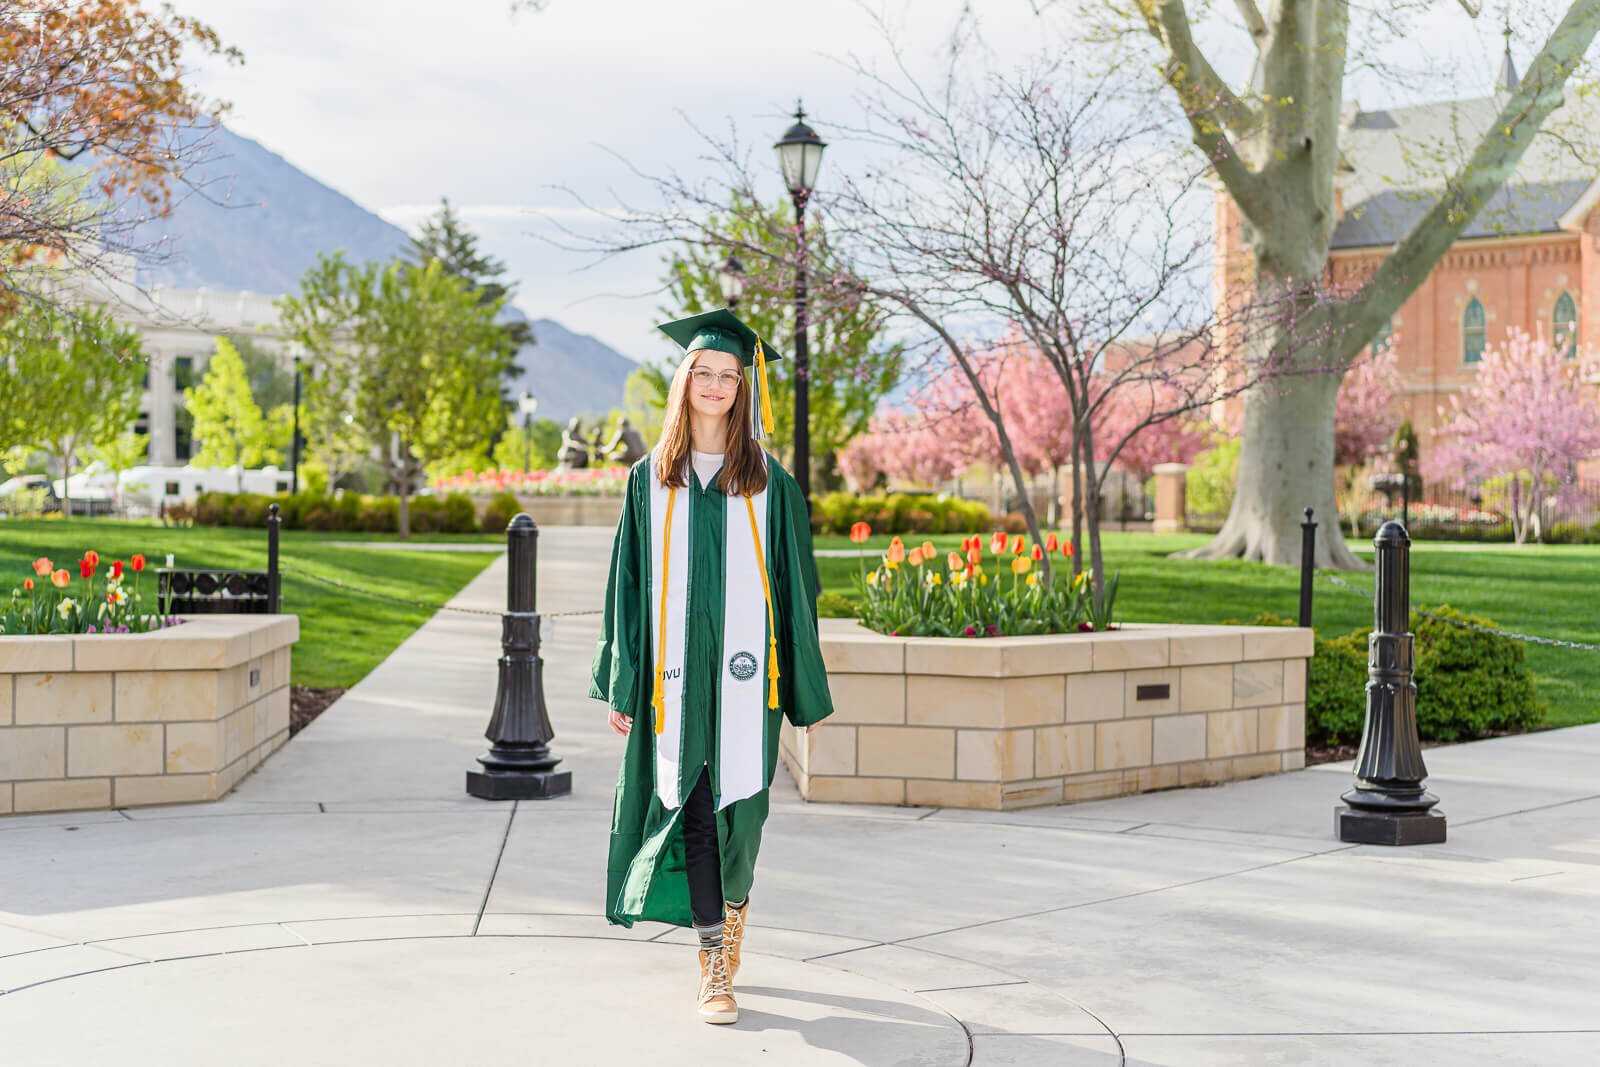 Salt Lake City senior photography of a high school senior girl wearing royal green colored graduation cap and gown walking in downtown Provo with blossoming trees in the distance